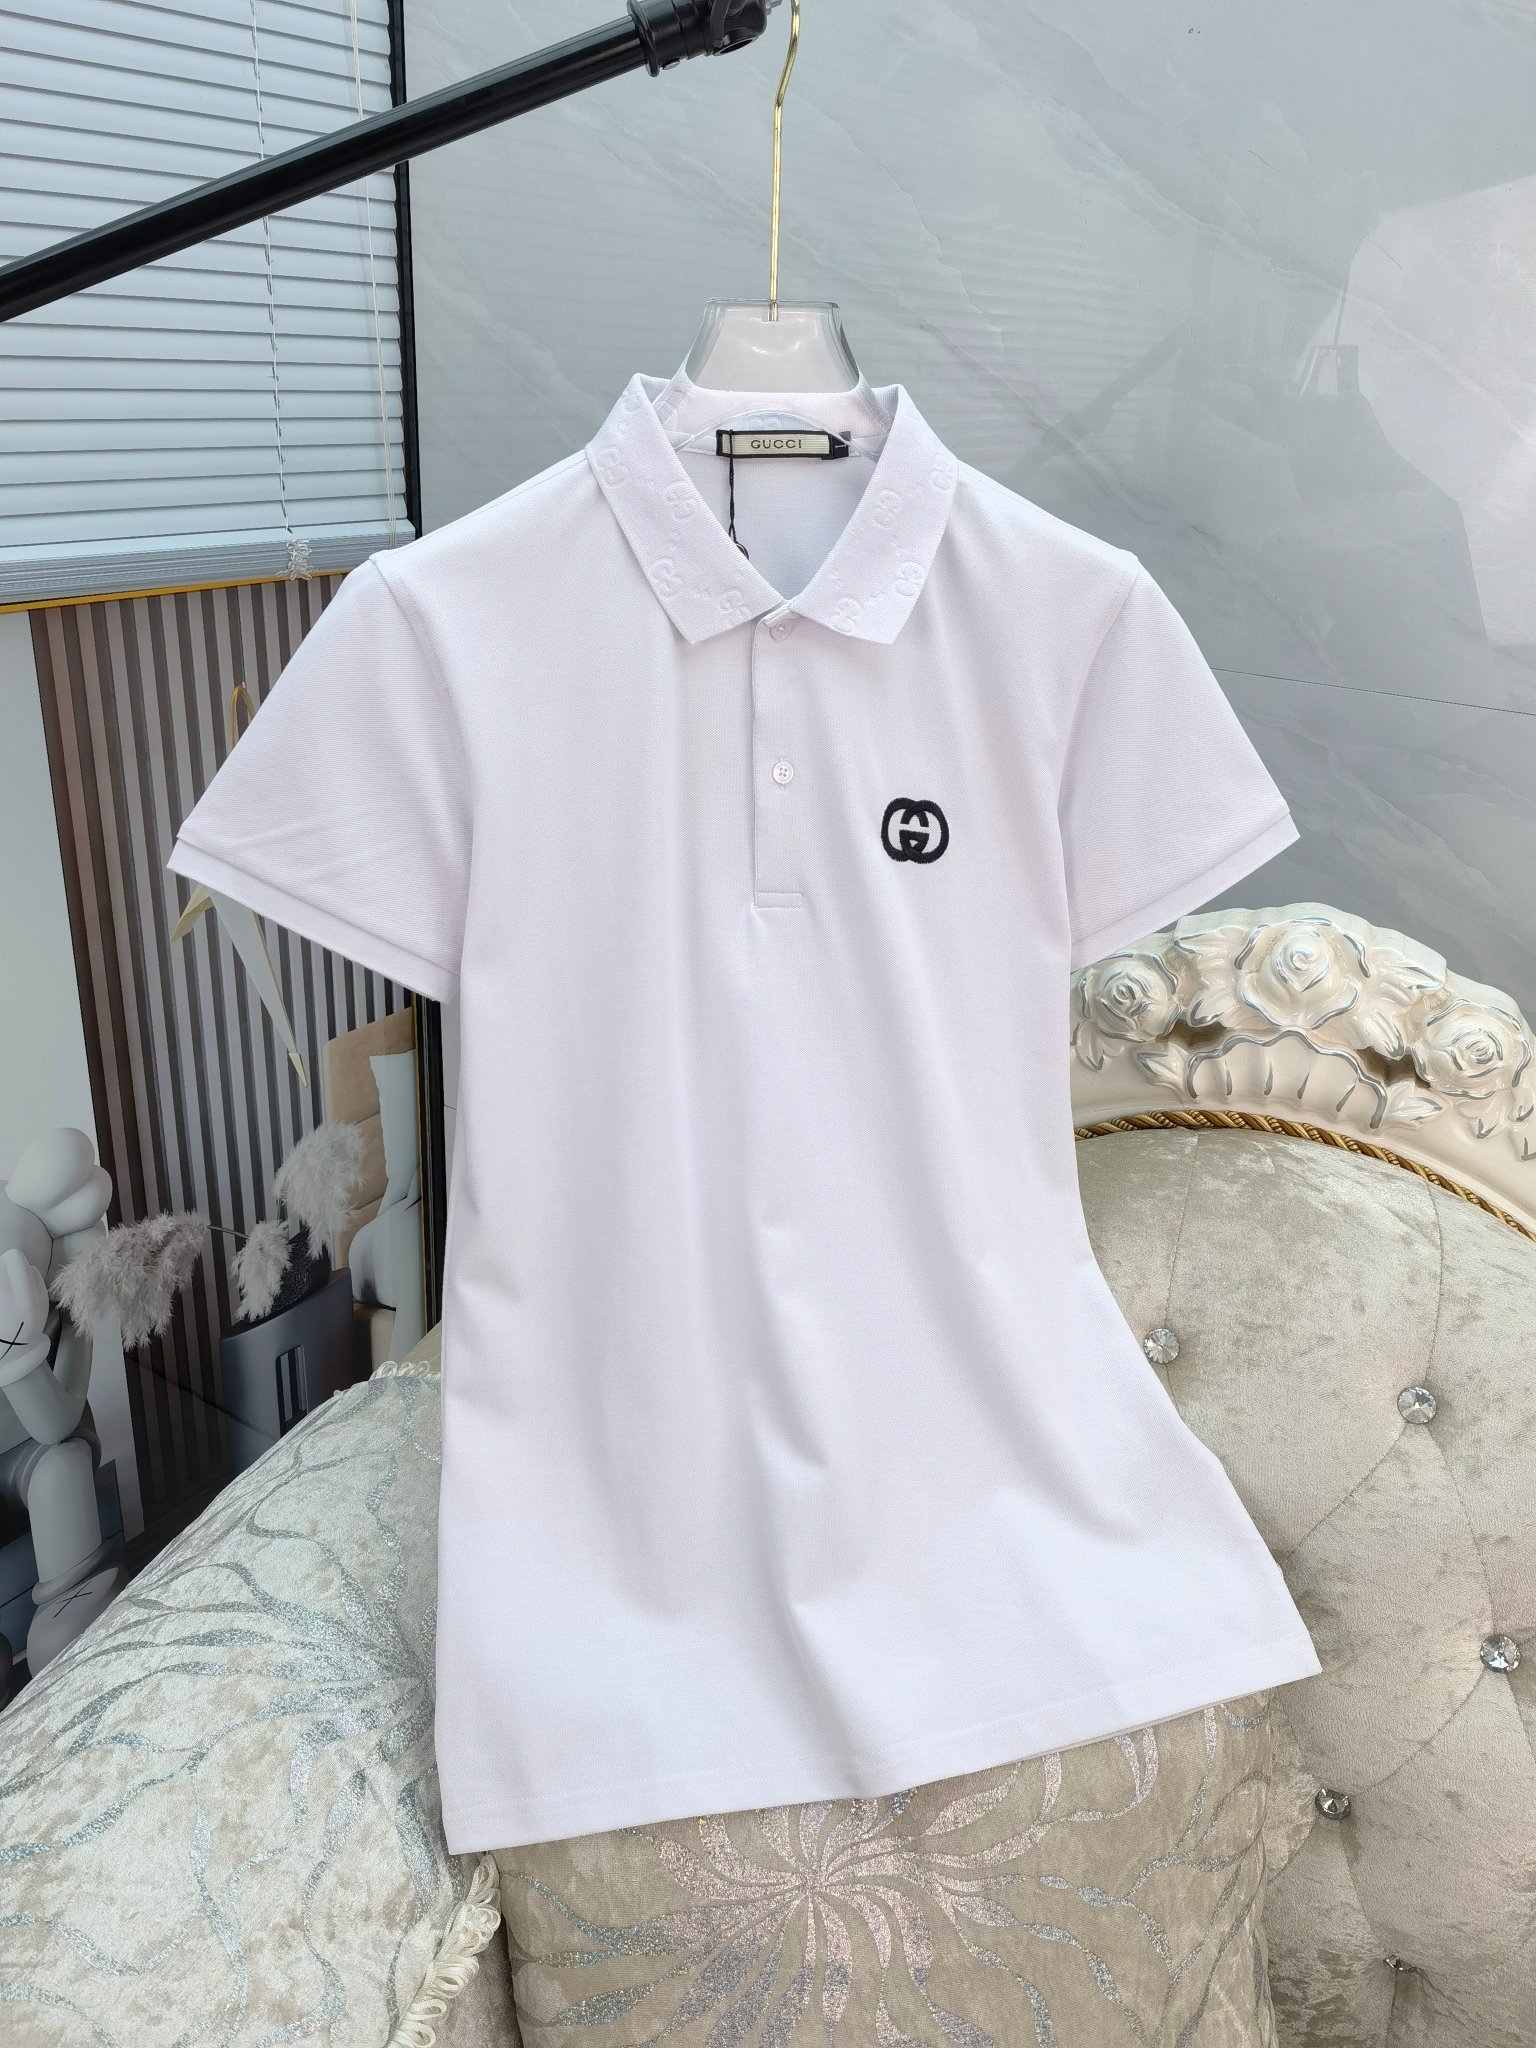 Gucci Clothing Polo T-Shirt Luxury Cheap Replica White Summer Collection Short Sleeve